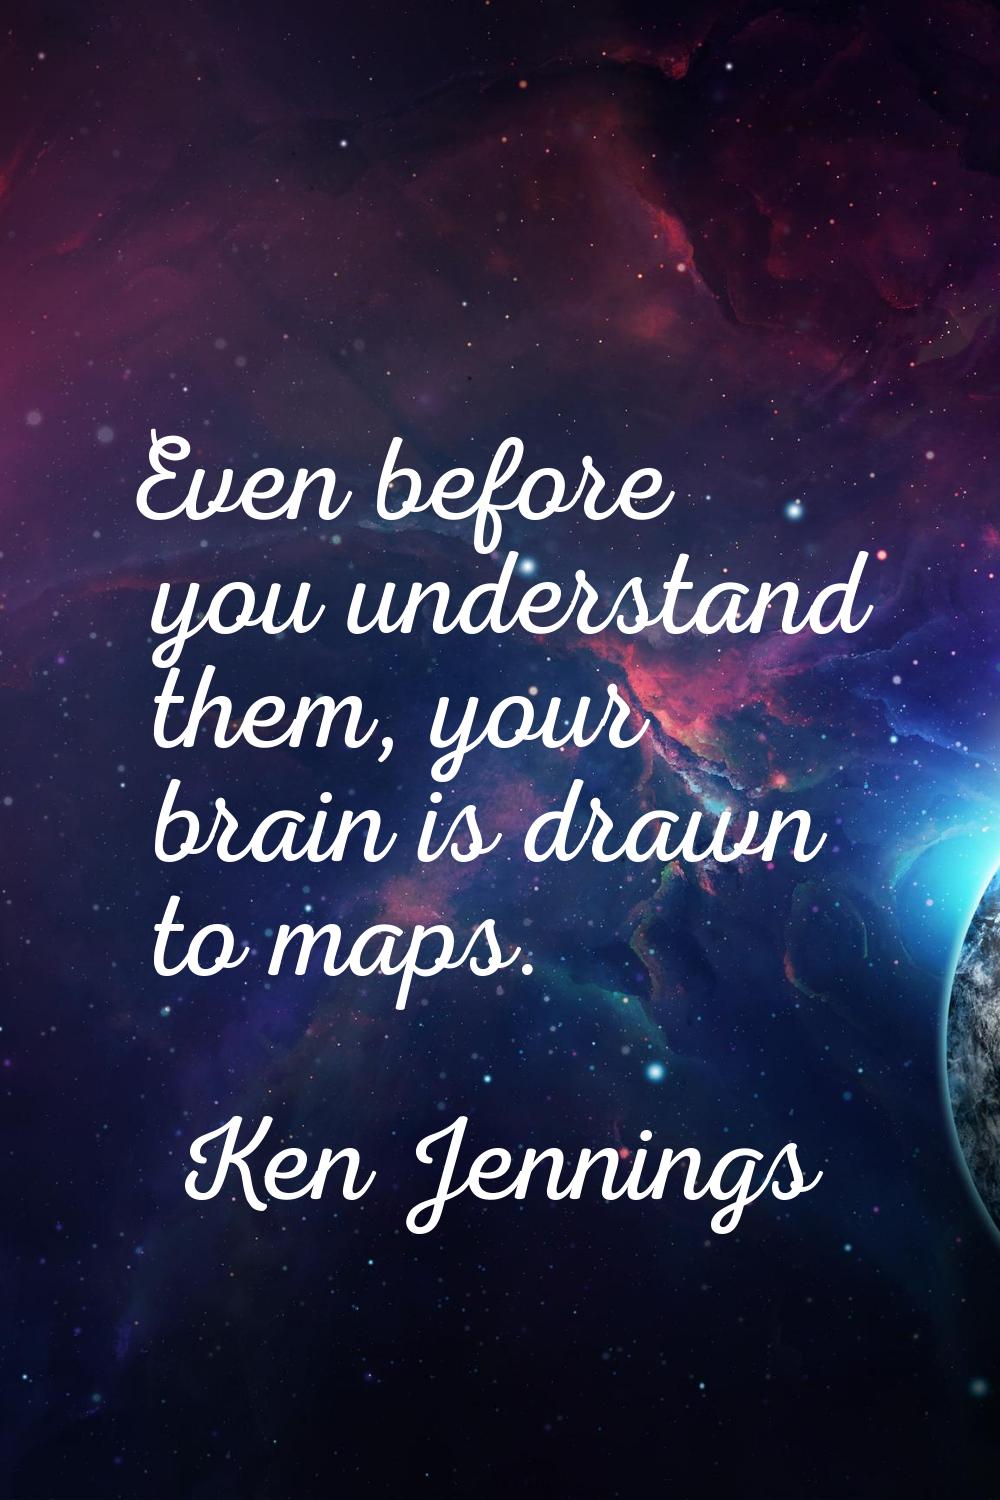 Even before you understand them, your brain is drawn to maps.